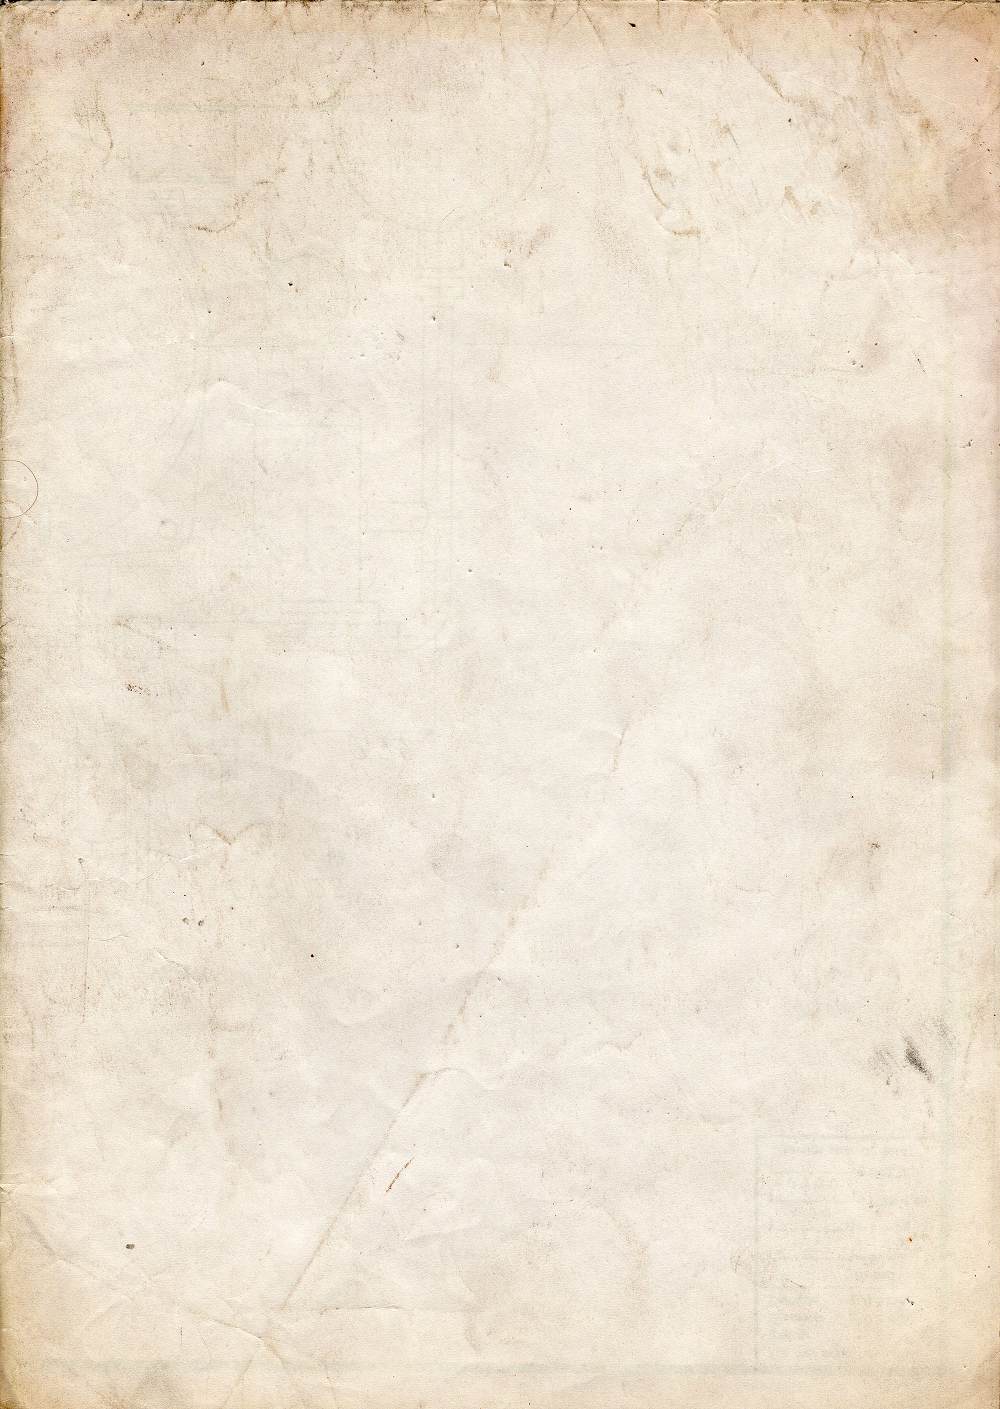 tpl/vintage/images/Paper_texture_v5_by_bashcorpo_w1000.jpg